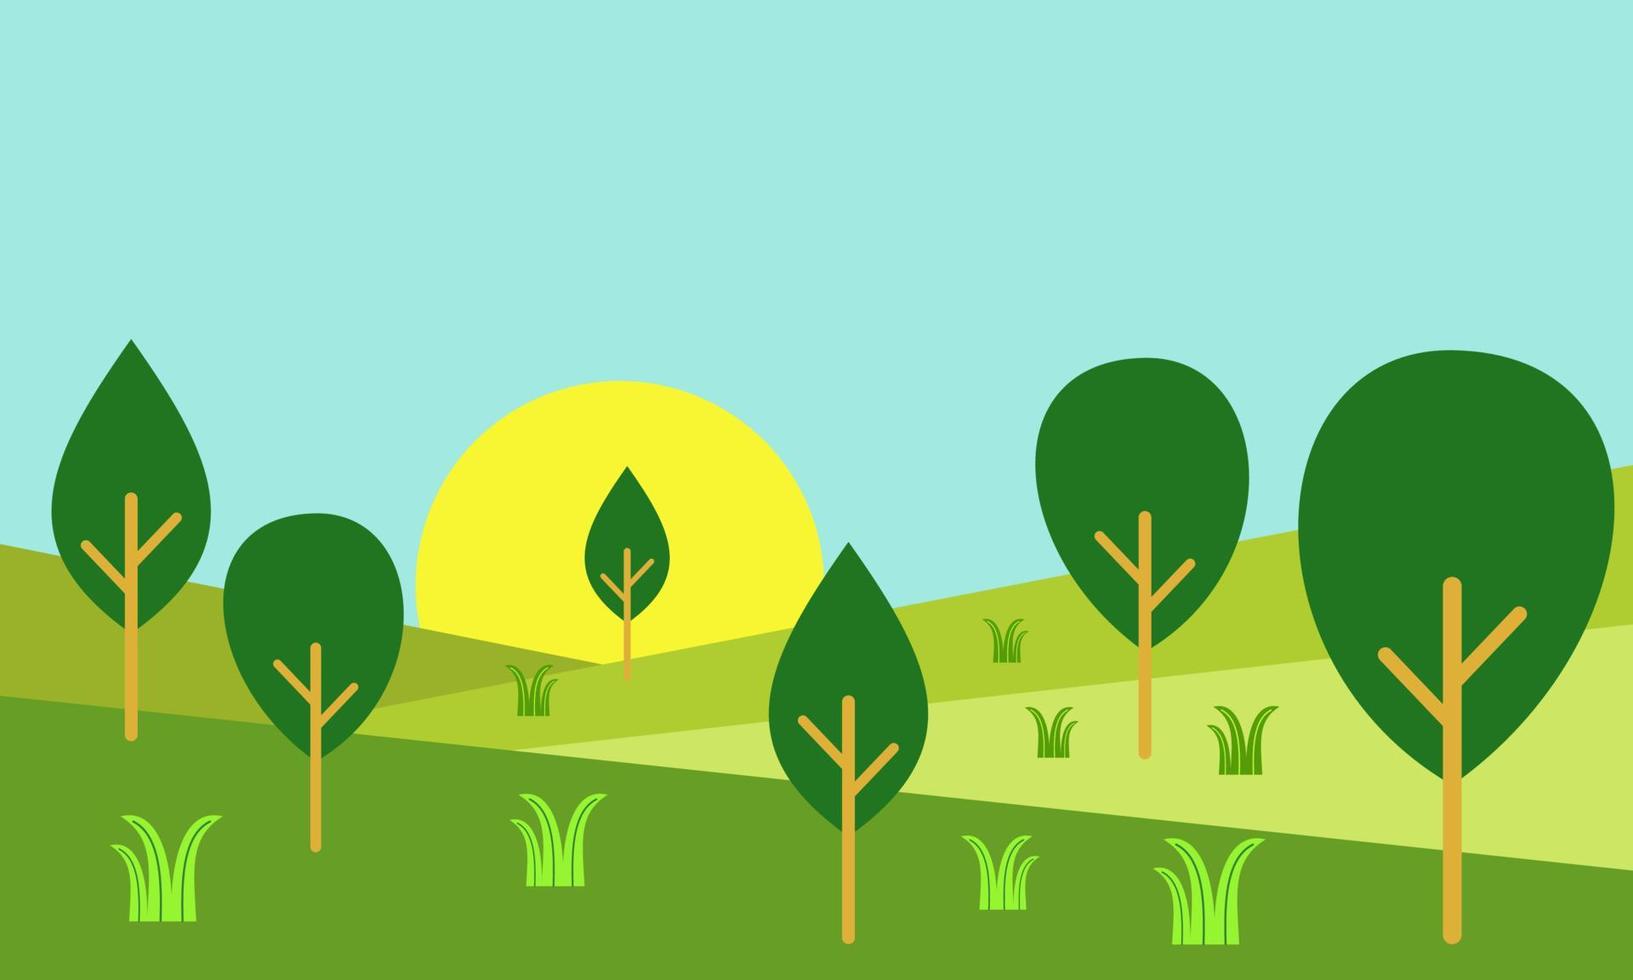 vector illustration of nature background with plants, hill and sky. Good for anything related to nature, environment, earth day, greenery